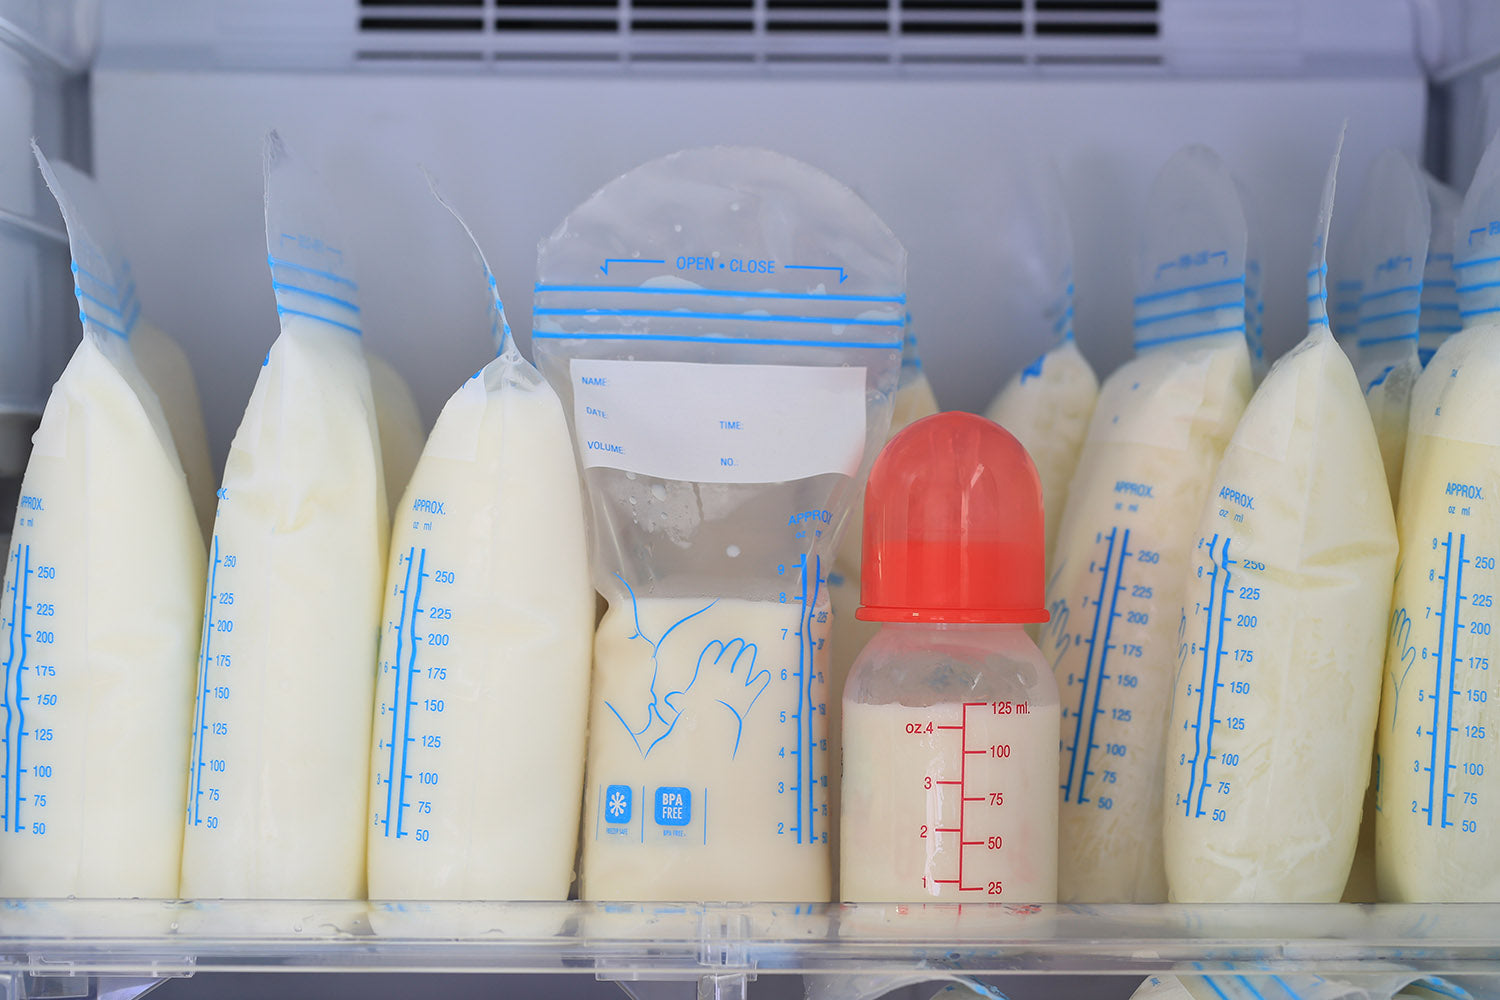 Give baby the best – breast milk